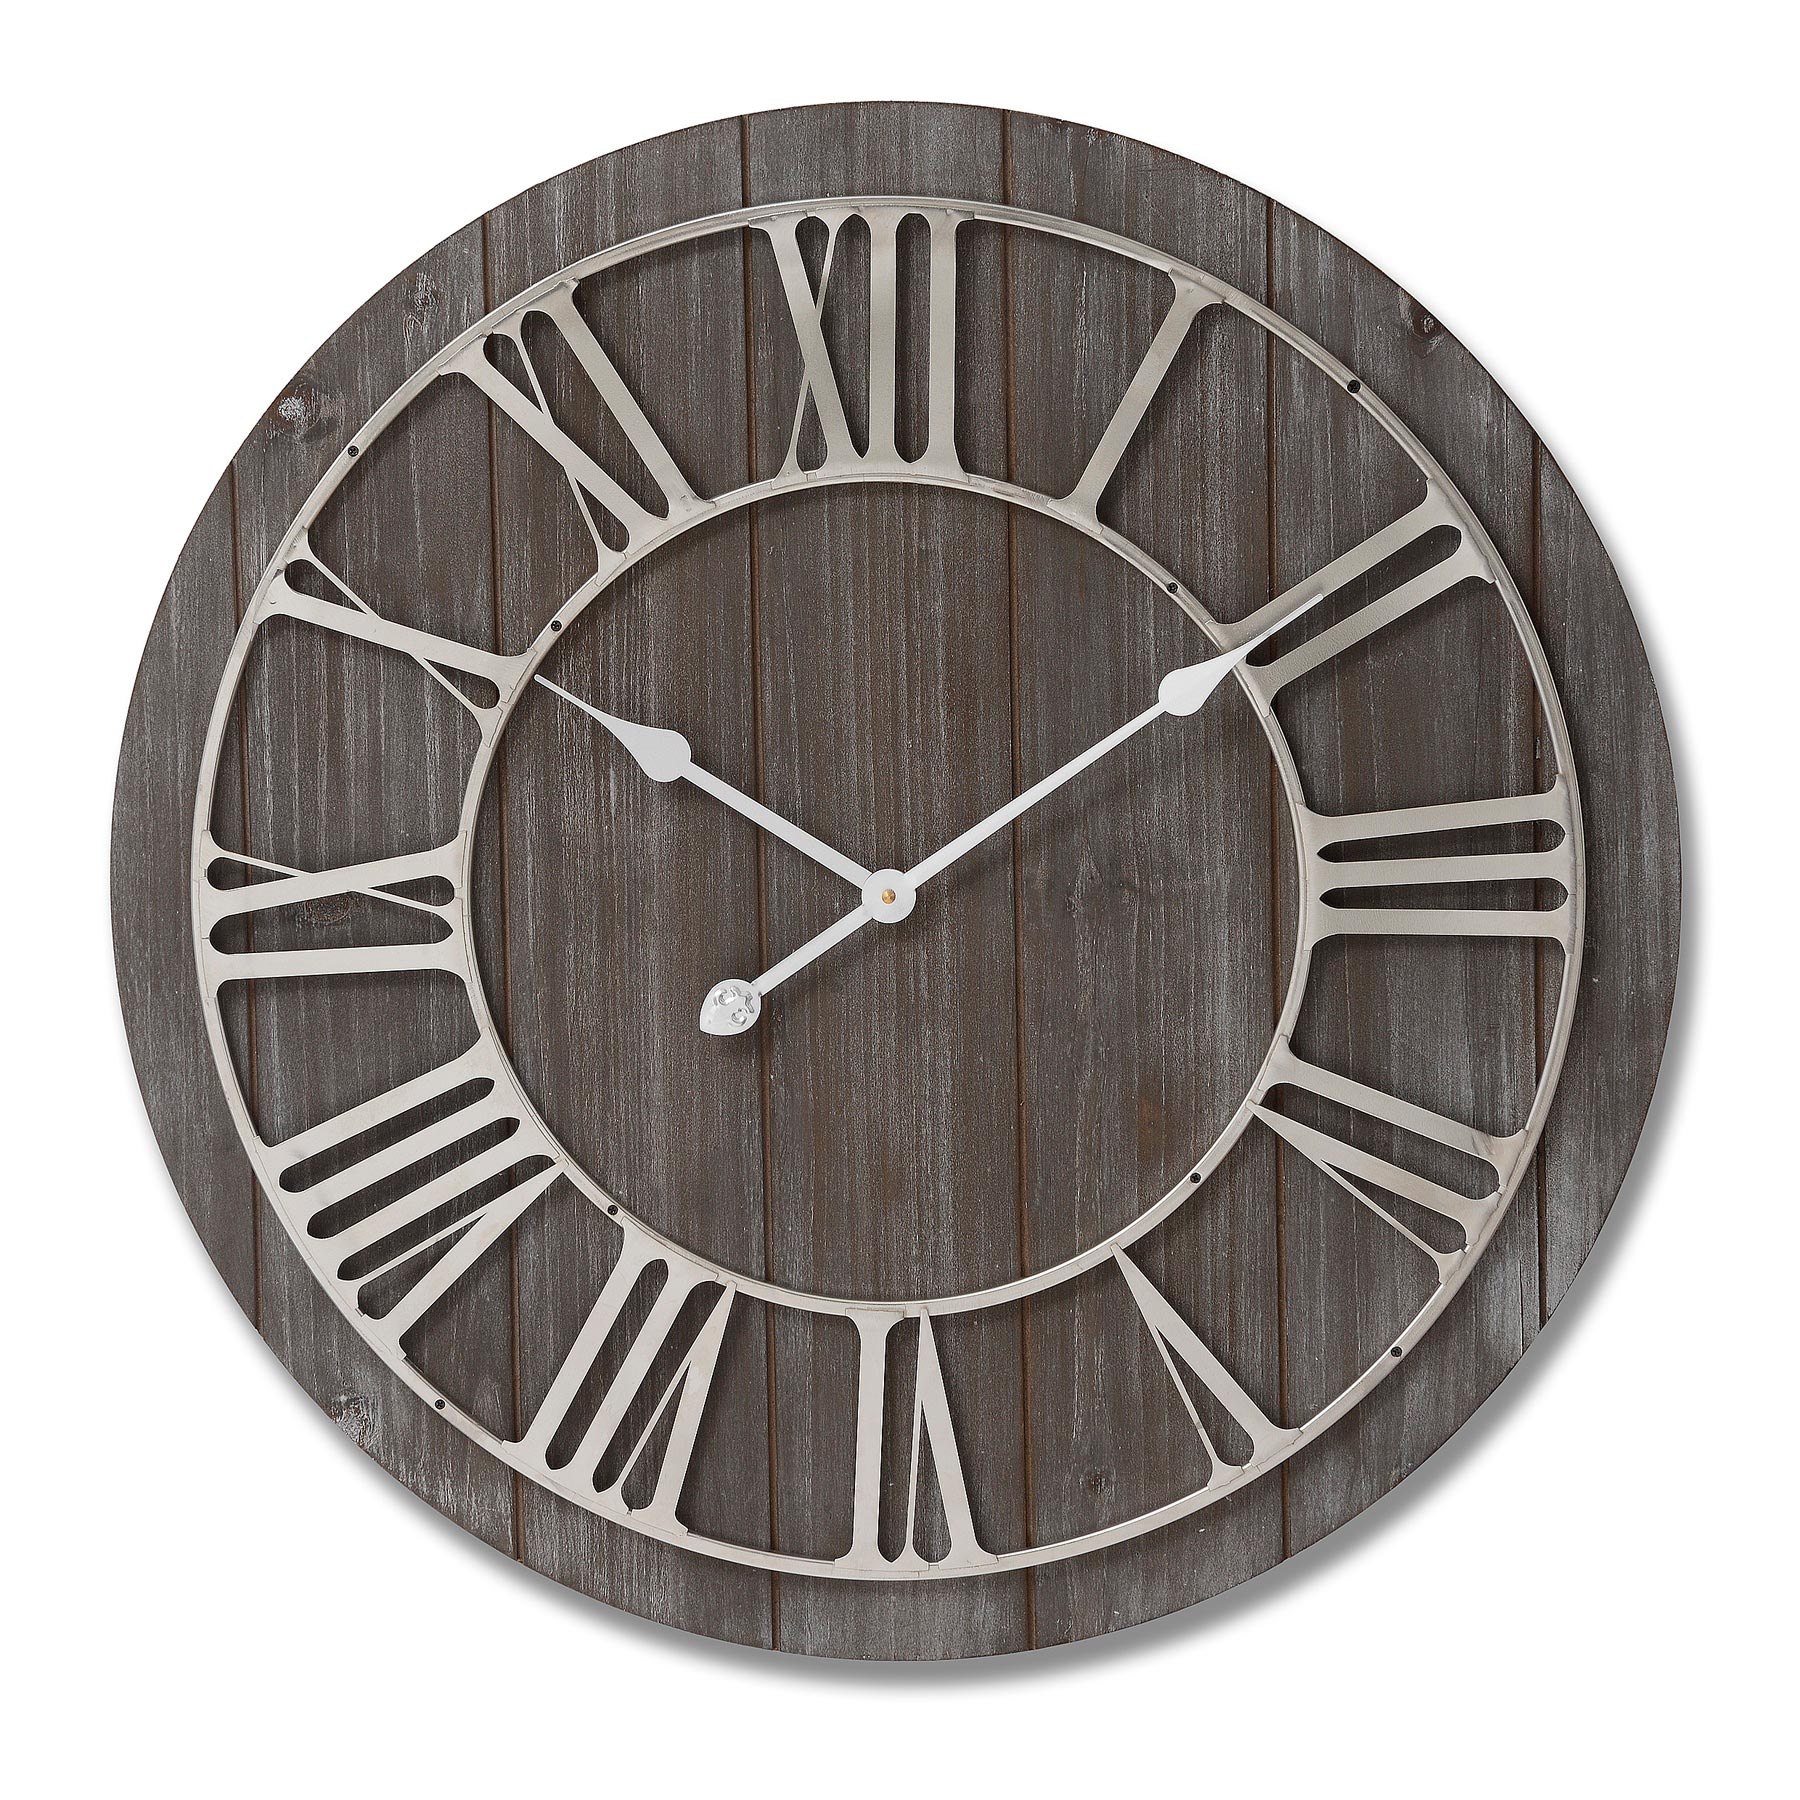 Wooden Clock With Contrasting Nickel Detail - Image 1